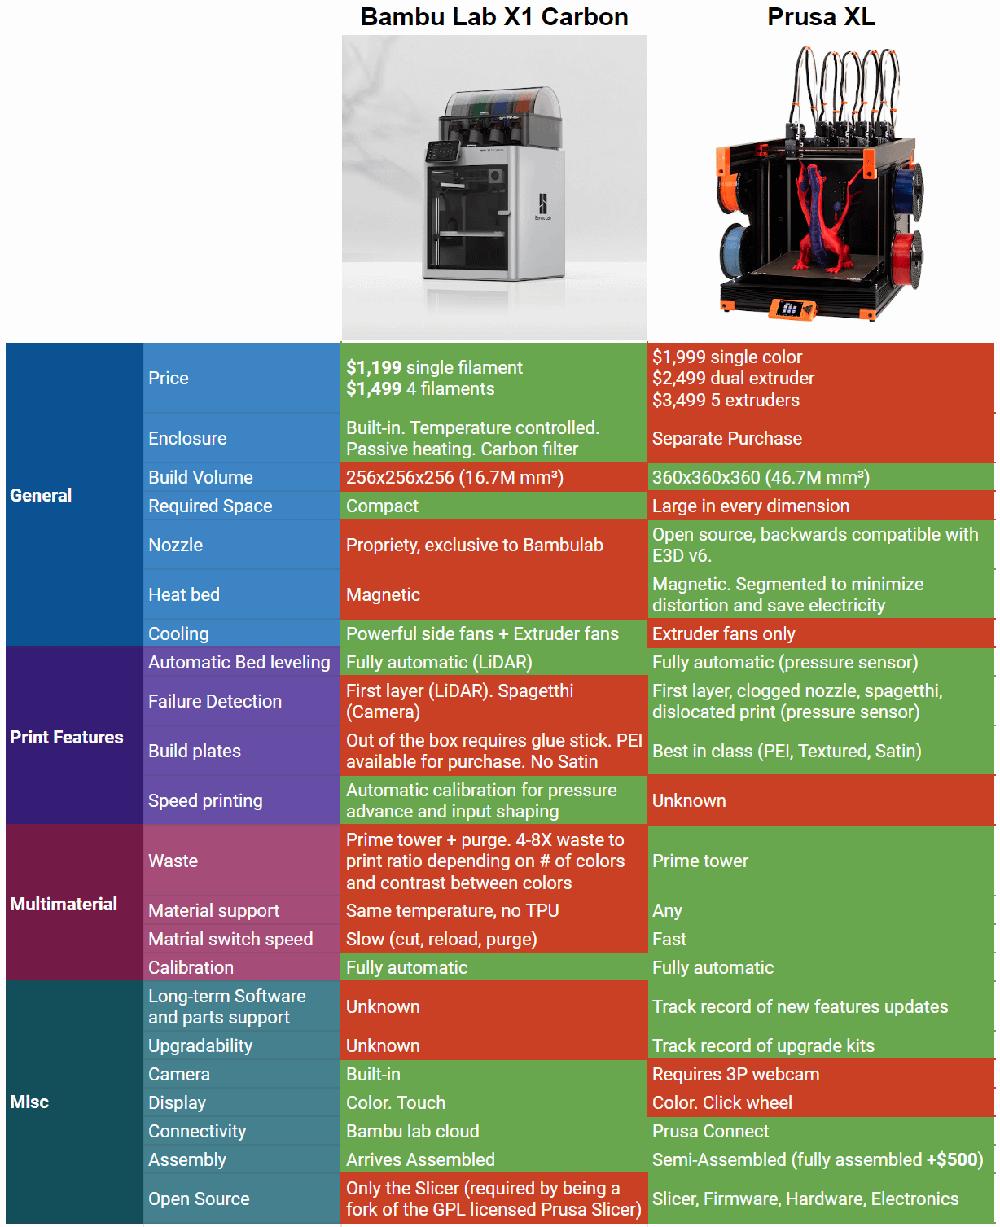 The image shows a comparison table between the features of the Bambu Lab X1 Carbon and the Prusa XL 3D printers.